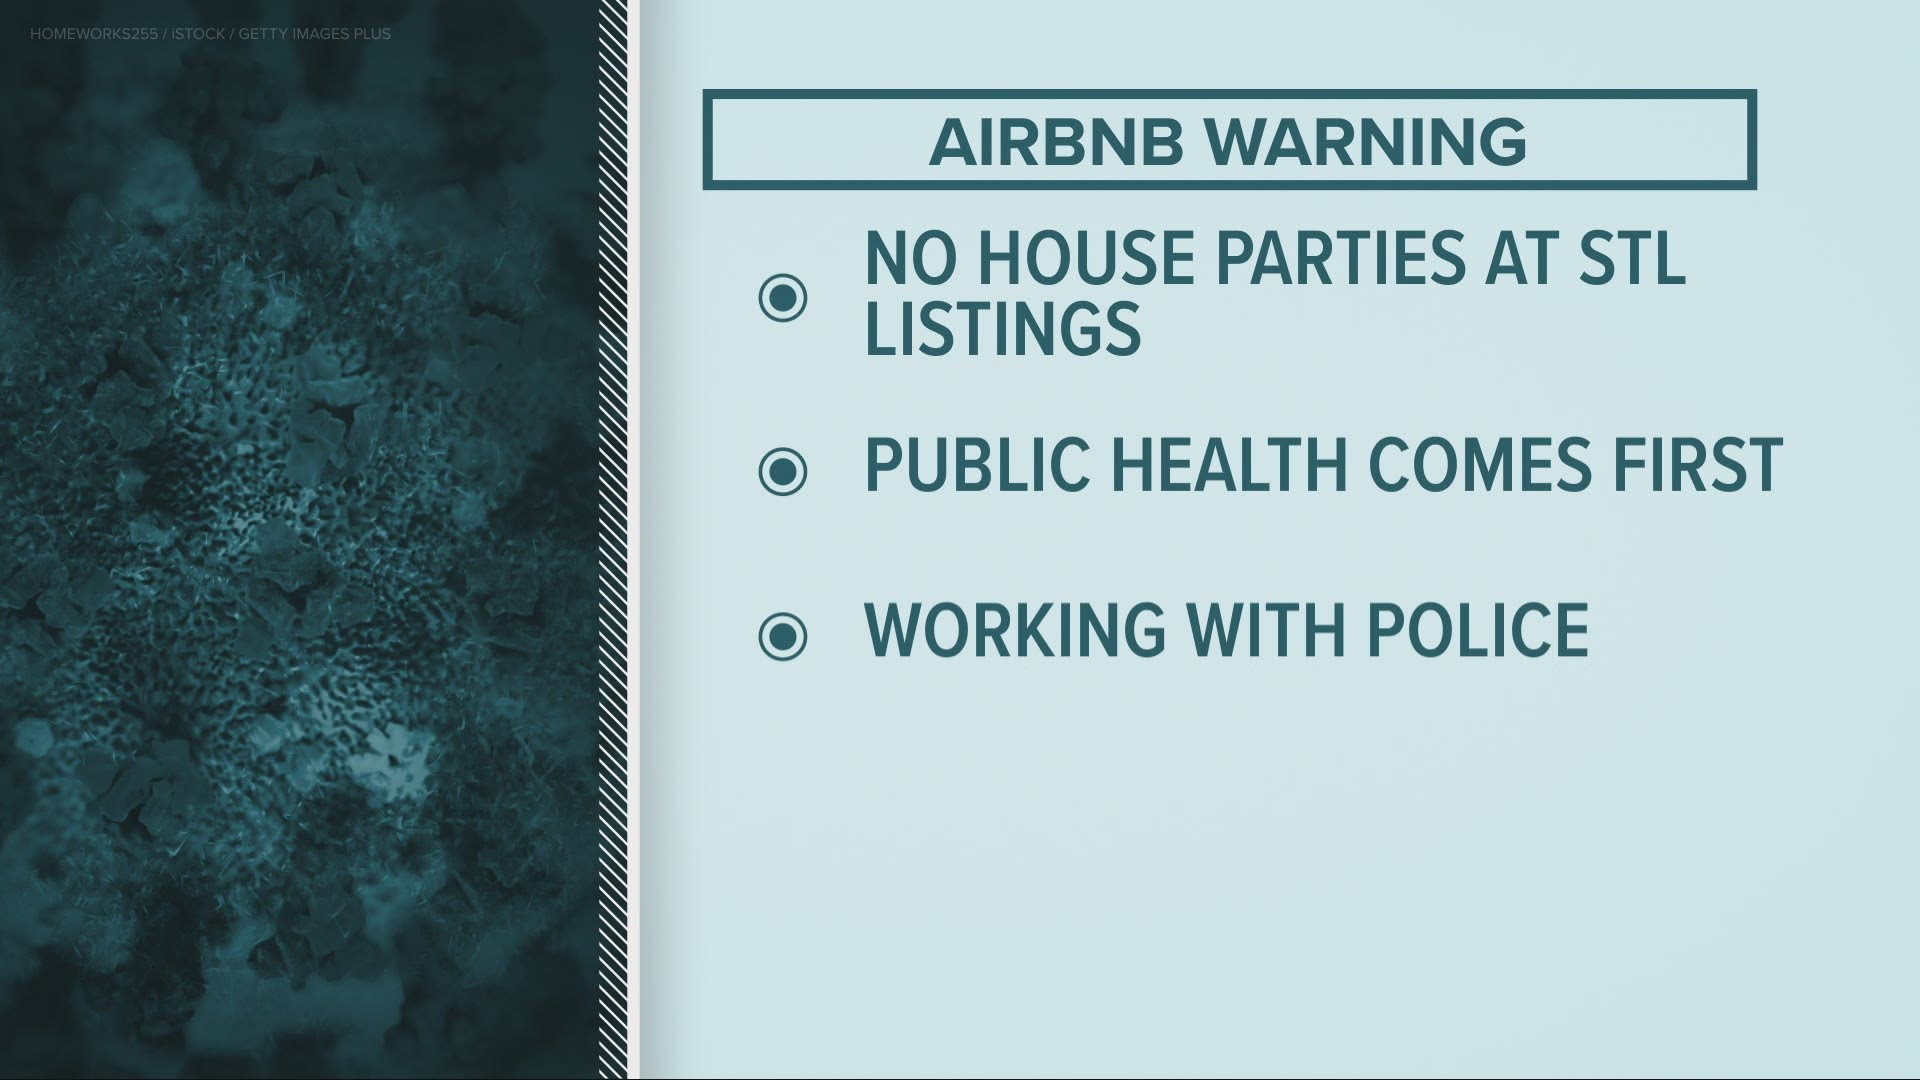 Airbnb will not let hosts allow parties and events in regions where current public health mandates prohibit events and gatherings.